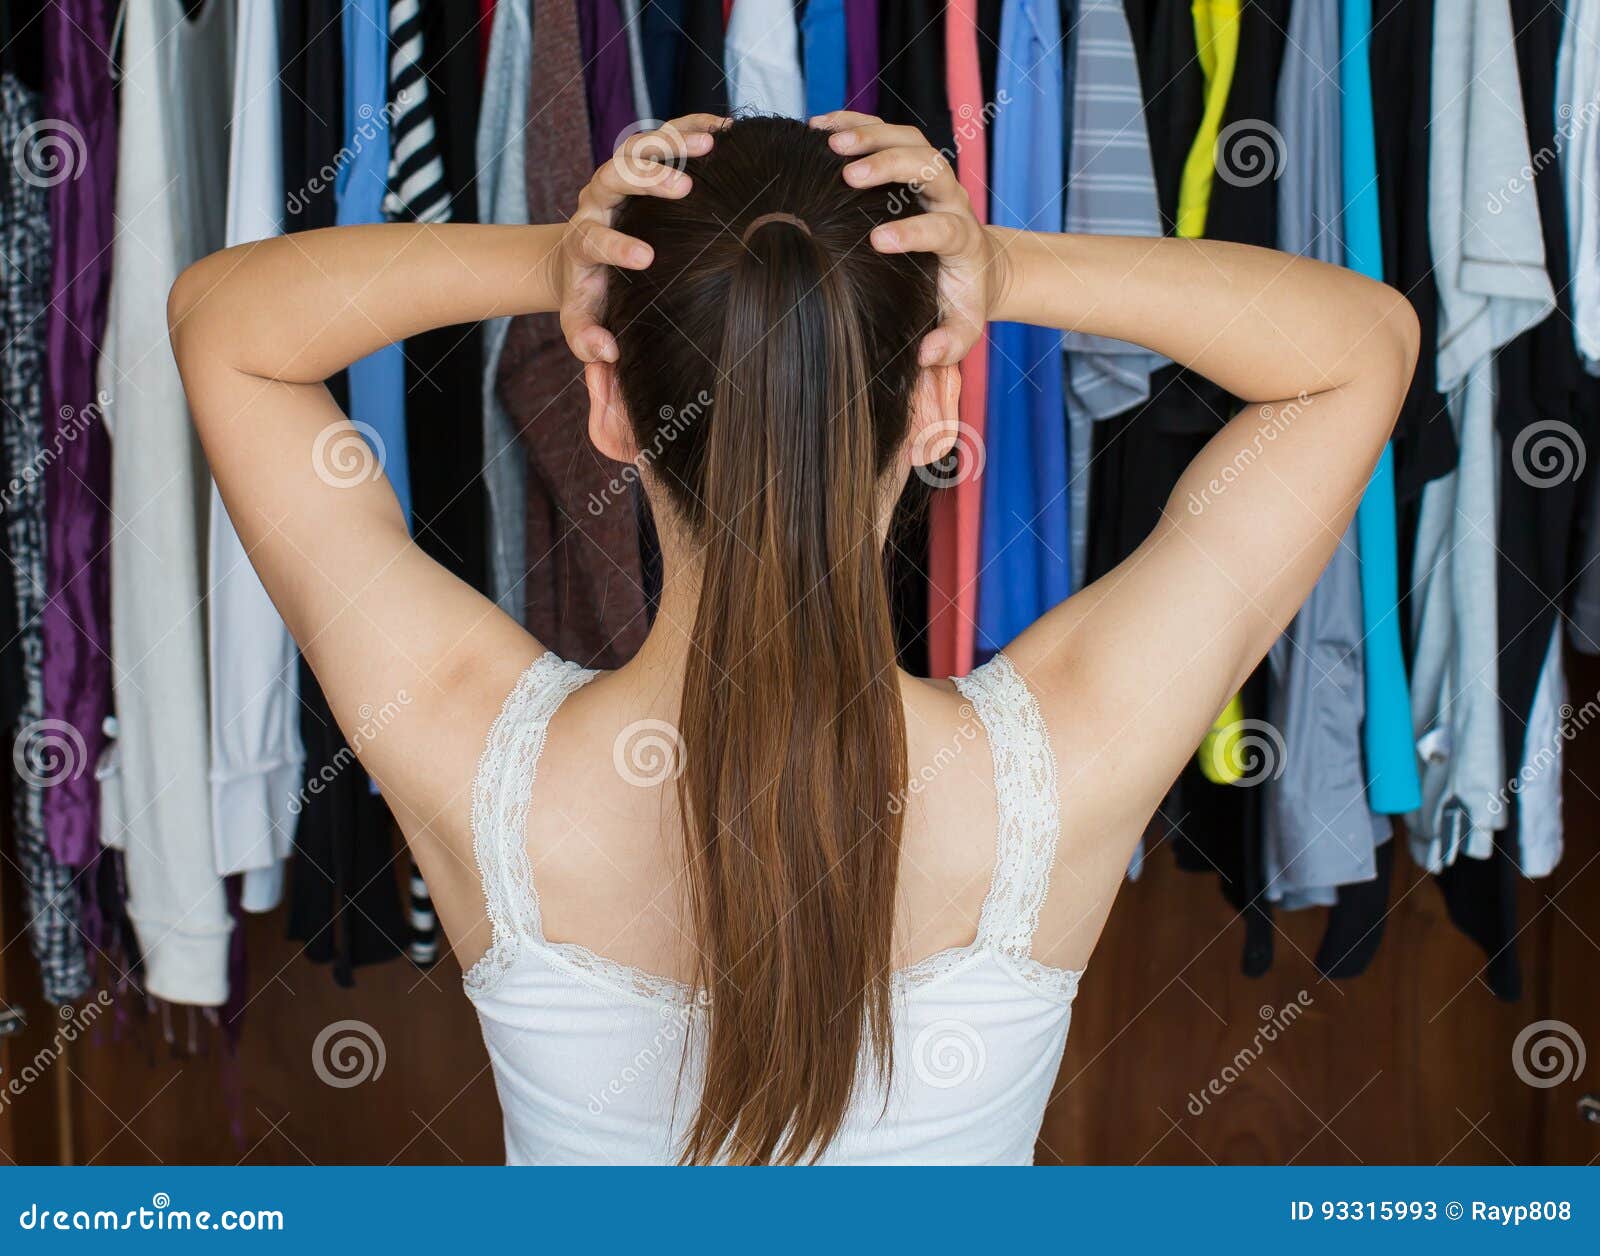 frustrated young woman cannot decide what to wear from her close